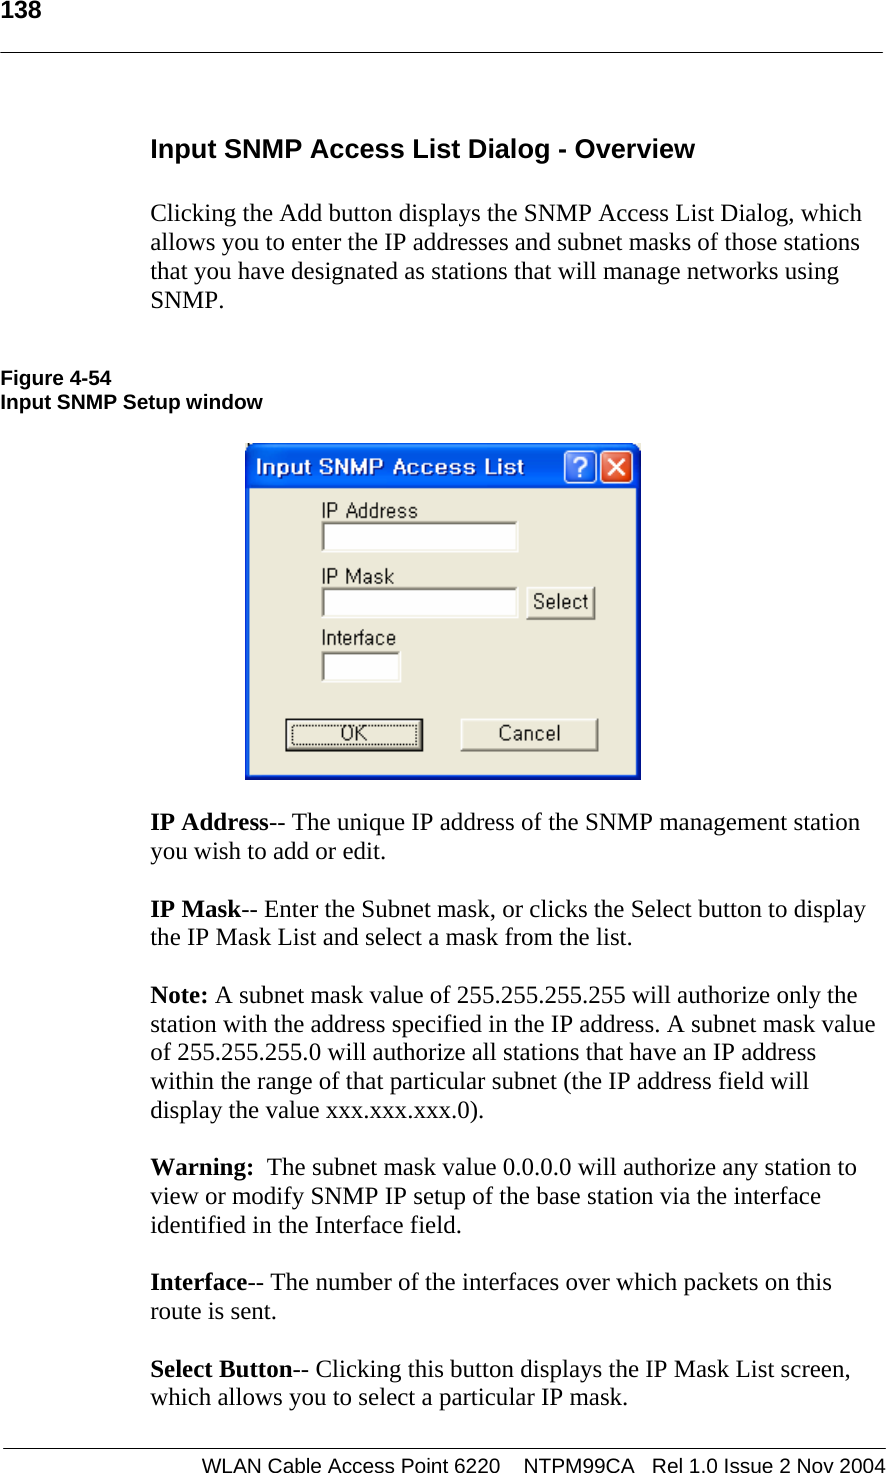   138  WLAN Cable Access Point 6220    NTPM99CA   Rel 1.0 Issue 2 Nov 2004 Input SNMP Access List Dialog - Overview  Clicking the Add button displays the SNMP Access List Dialog, which allows you to enter the IP addresses and subnet masks of those stations that you have designated as stations that will manage networks using SNMP.   Figure 4-54 Input SNMP Setup window    IP Address-- The unique IP address of the SNMP management station you wish to add or edit.  IP Mask-- Enter the Subnet mask, or clicks the Select button to display the IP Mask List and select a mask from the list.  Note: A subnet mask value of 255.255.255.255 will authorize only the station with the address specified in the IP address. A subnet mask value of 255.255.255.0 will authorize all stations that have an IP address within the range of that particular subnet (the IP address field will display the value xxx.xxx.xxx.0).   Warning:  The subnet mask value 0.0.0.0 will authorize any station to view or modify SNMP IP setup of the base station via the interface identified in the Interface field.  Interface-- The number of the interfaces over which packets on this route is sent.  Select Button-- Clicking this button displays the IP Mask List screen, which allows you to select a particular IP mask. 